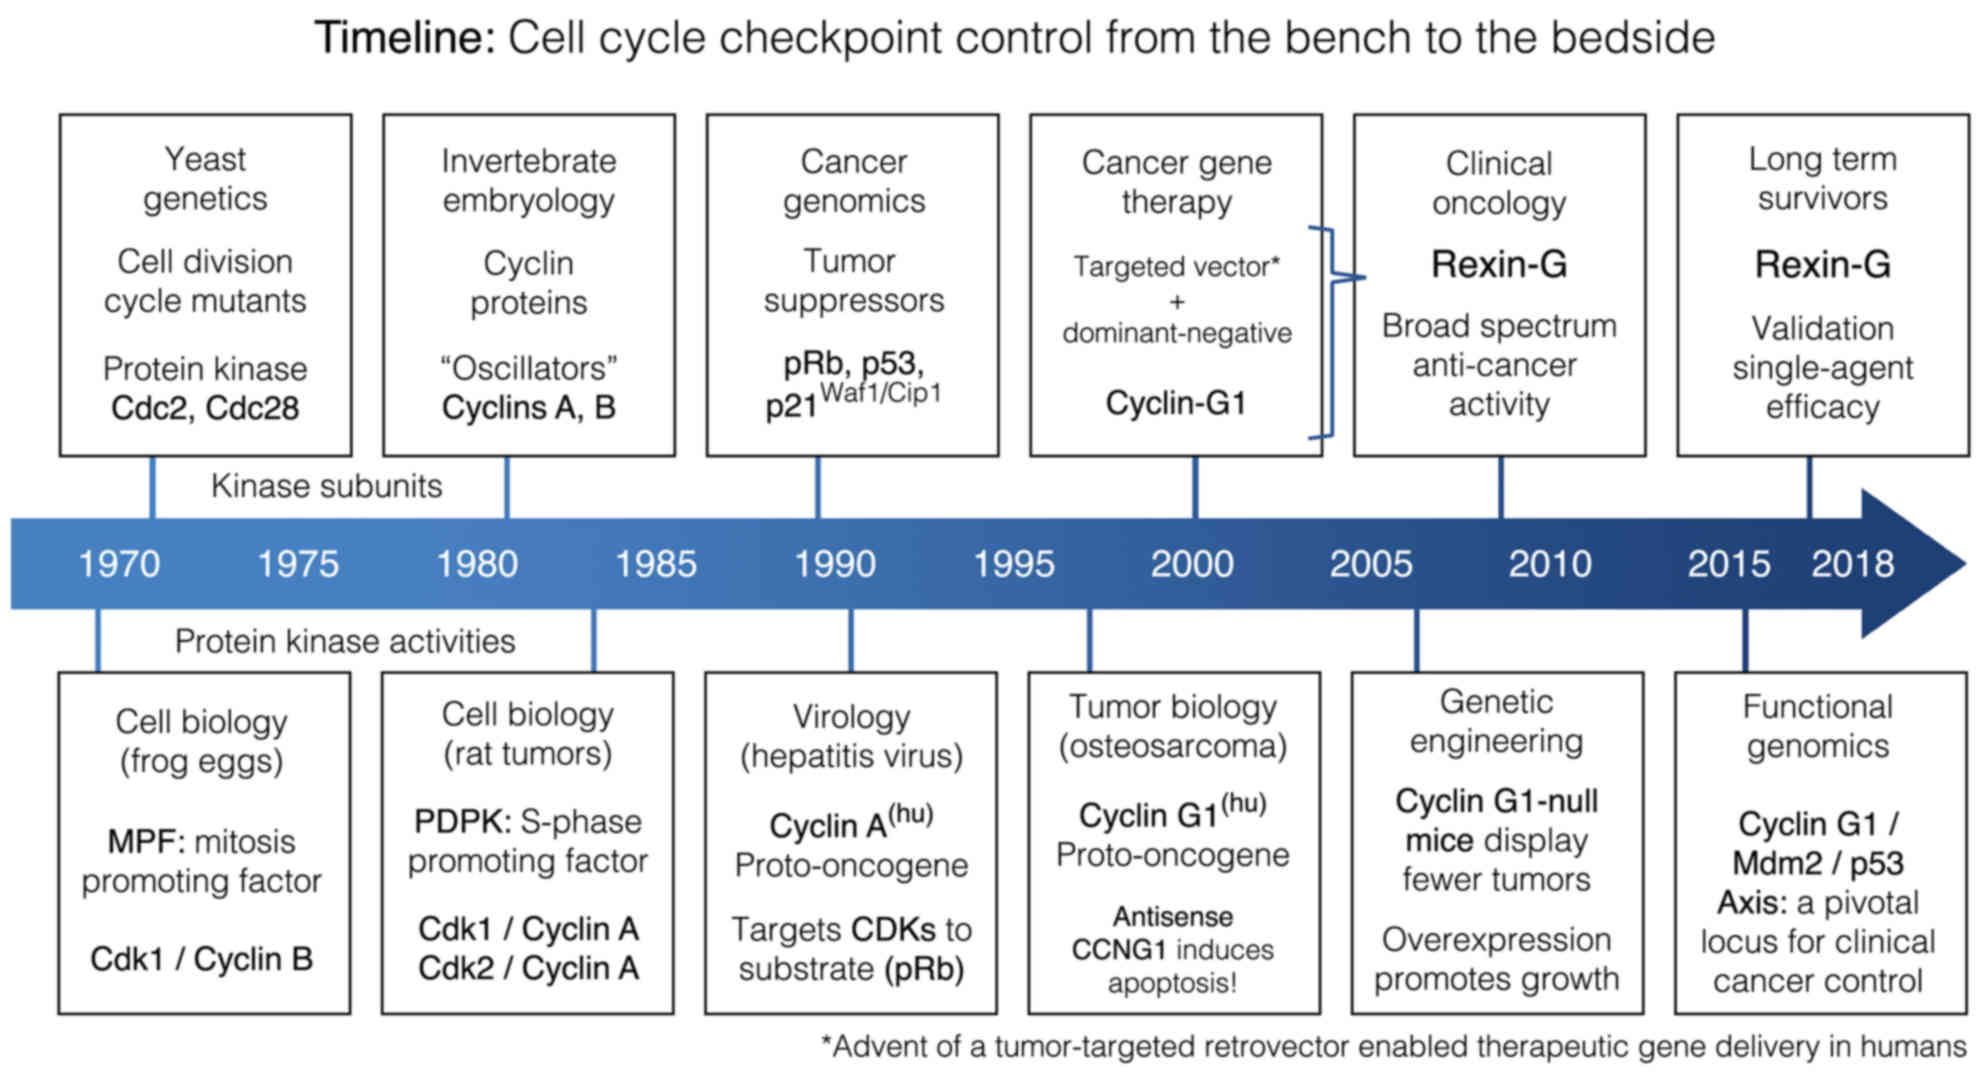 Cell cycle checkpoint control: The cyclin G1/Mdm2/p53 axis emerges as a ...